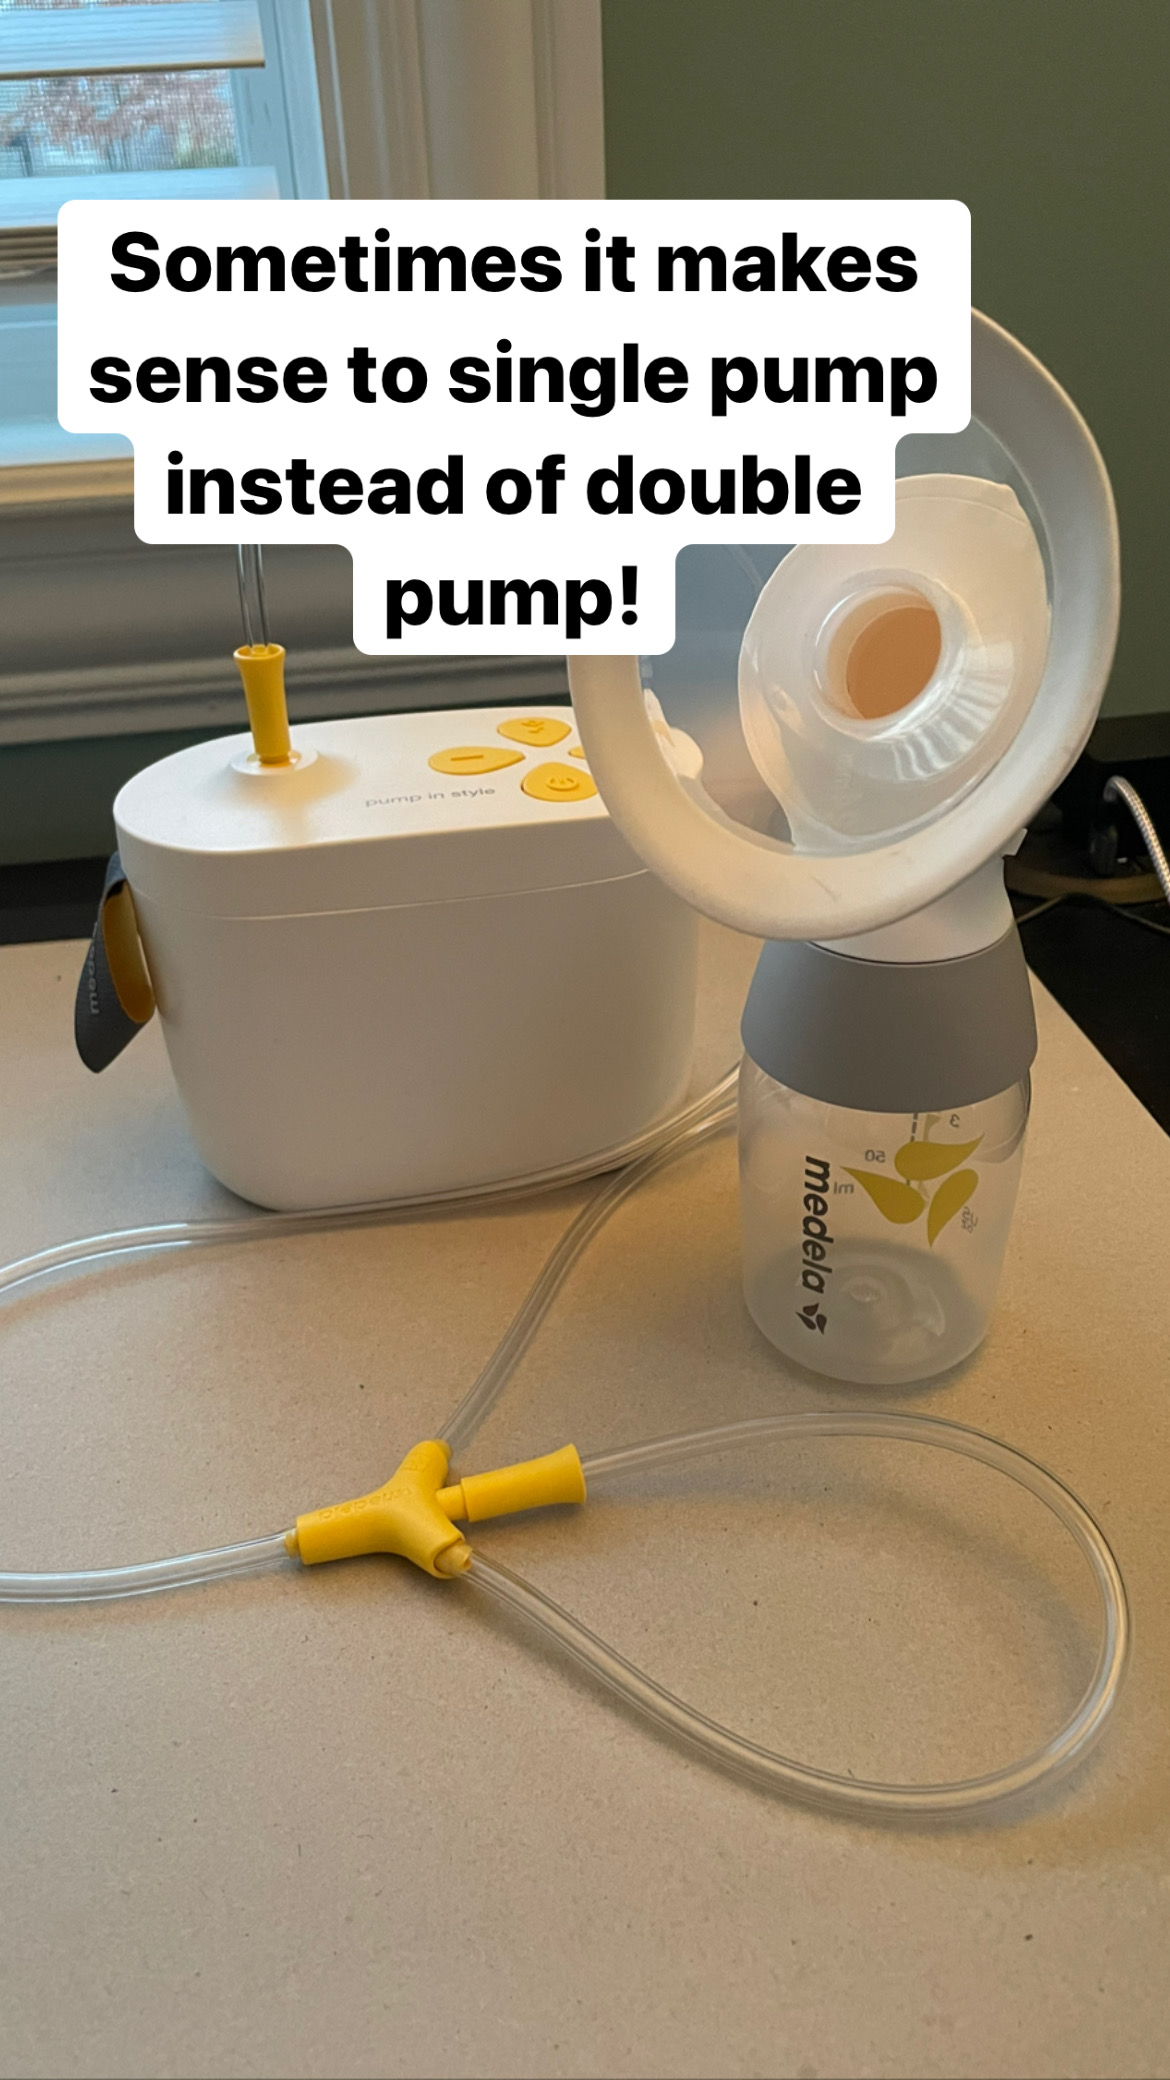 fundament brand heilig Should You Get a Single or Double Breast Pump? - Exclusive Pumping